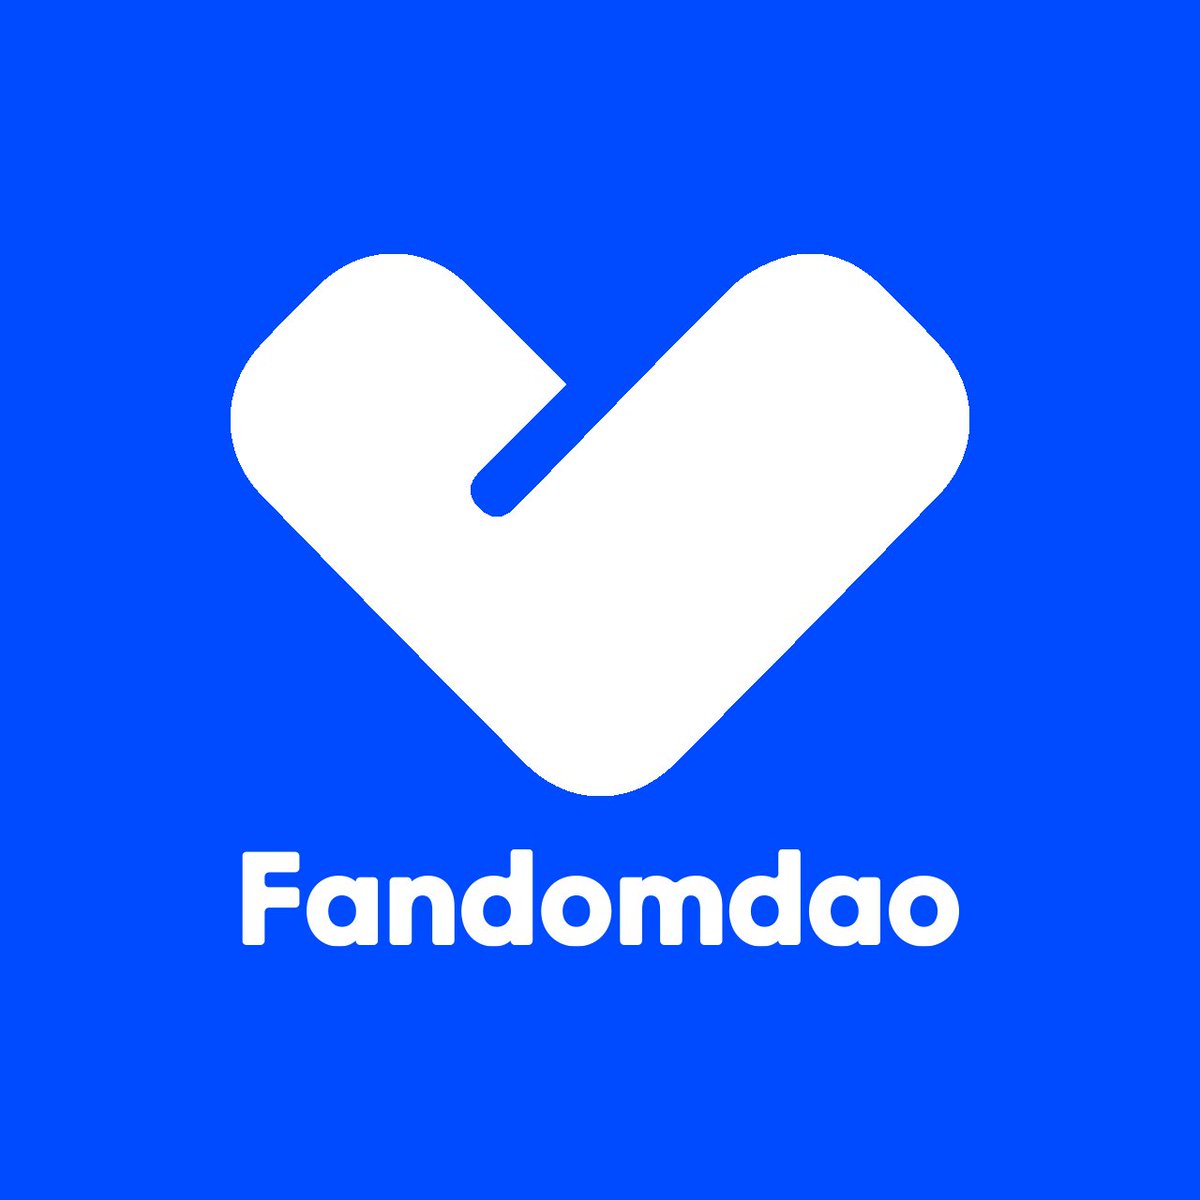 Actual #socialfi platform, #Fandomdao is here waiting for you. Meet your new friends, interact with each other. Shout out your current interest in @Fandomdao_ . 🛜fandomdao.com